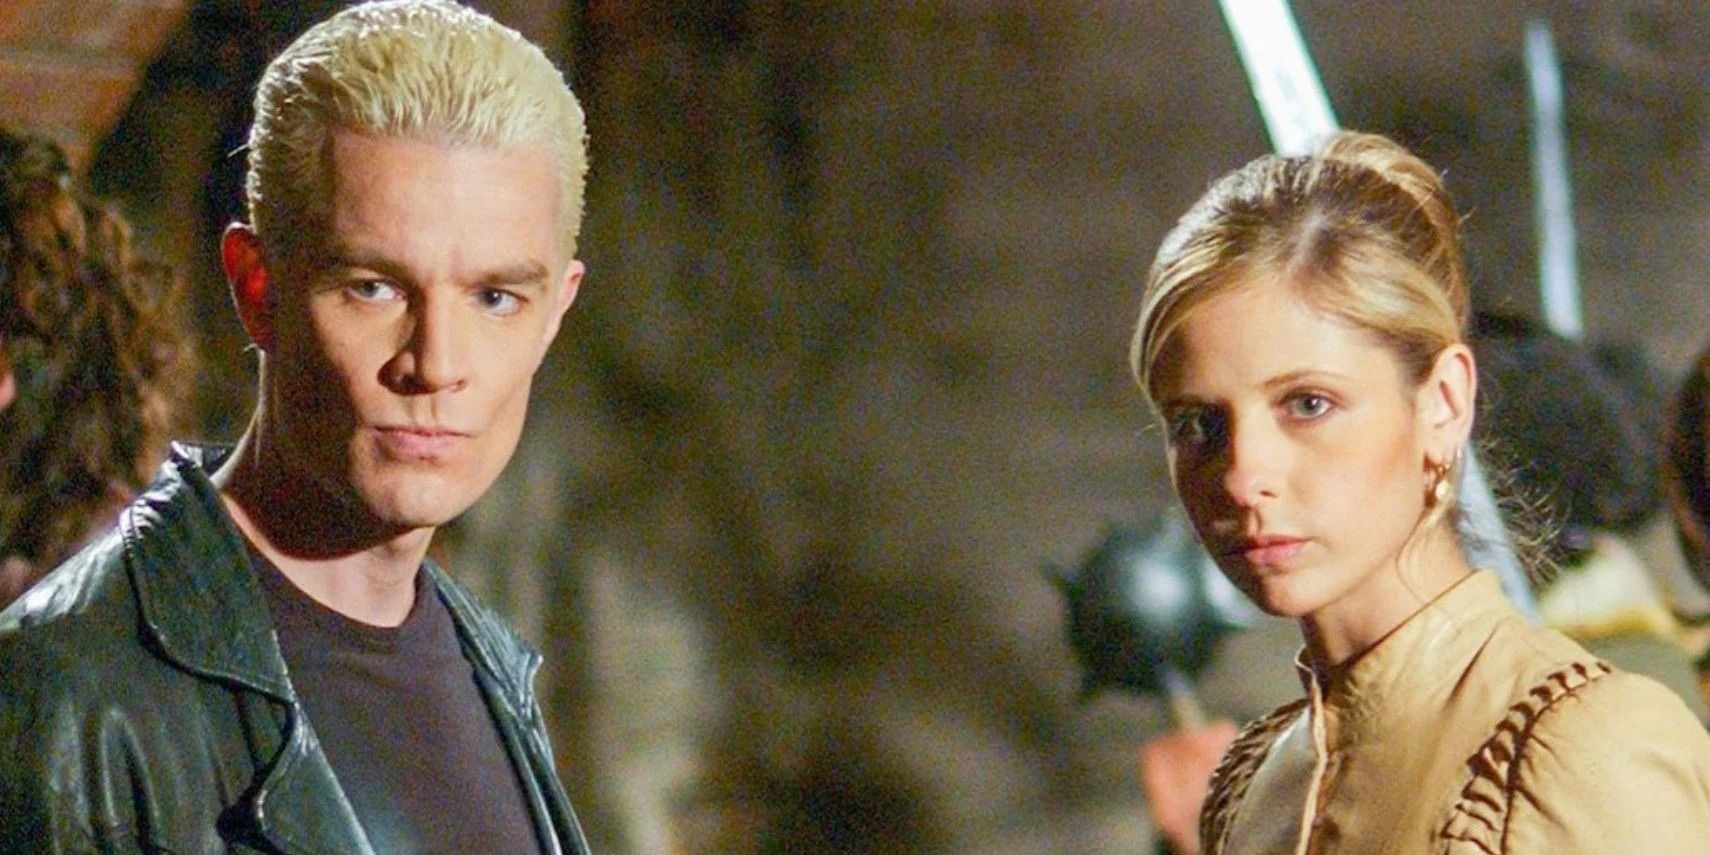 Buffy Summers (Sarah Michelle Gellar) and Spike (James Marsters) in Buffy the Vampire Slayer